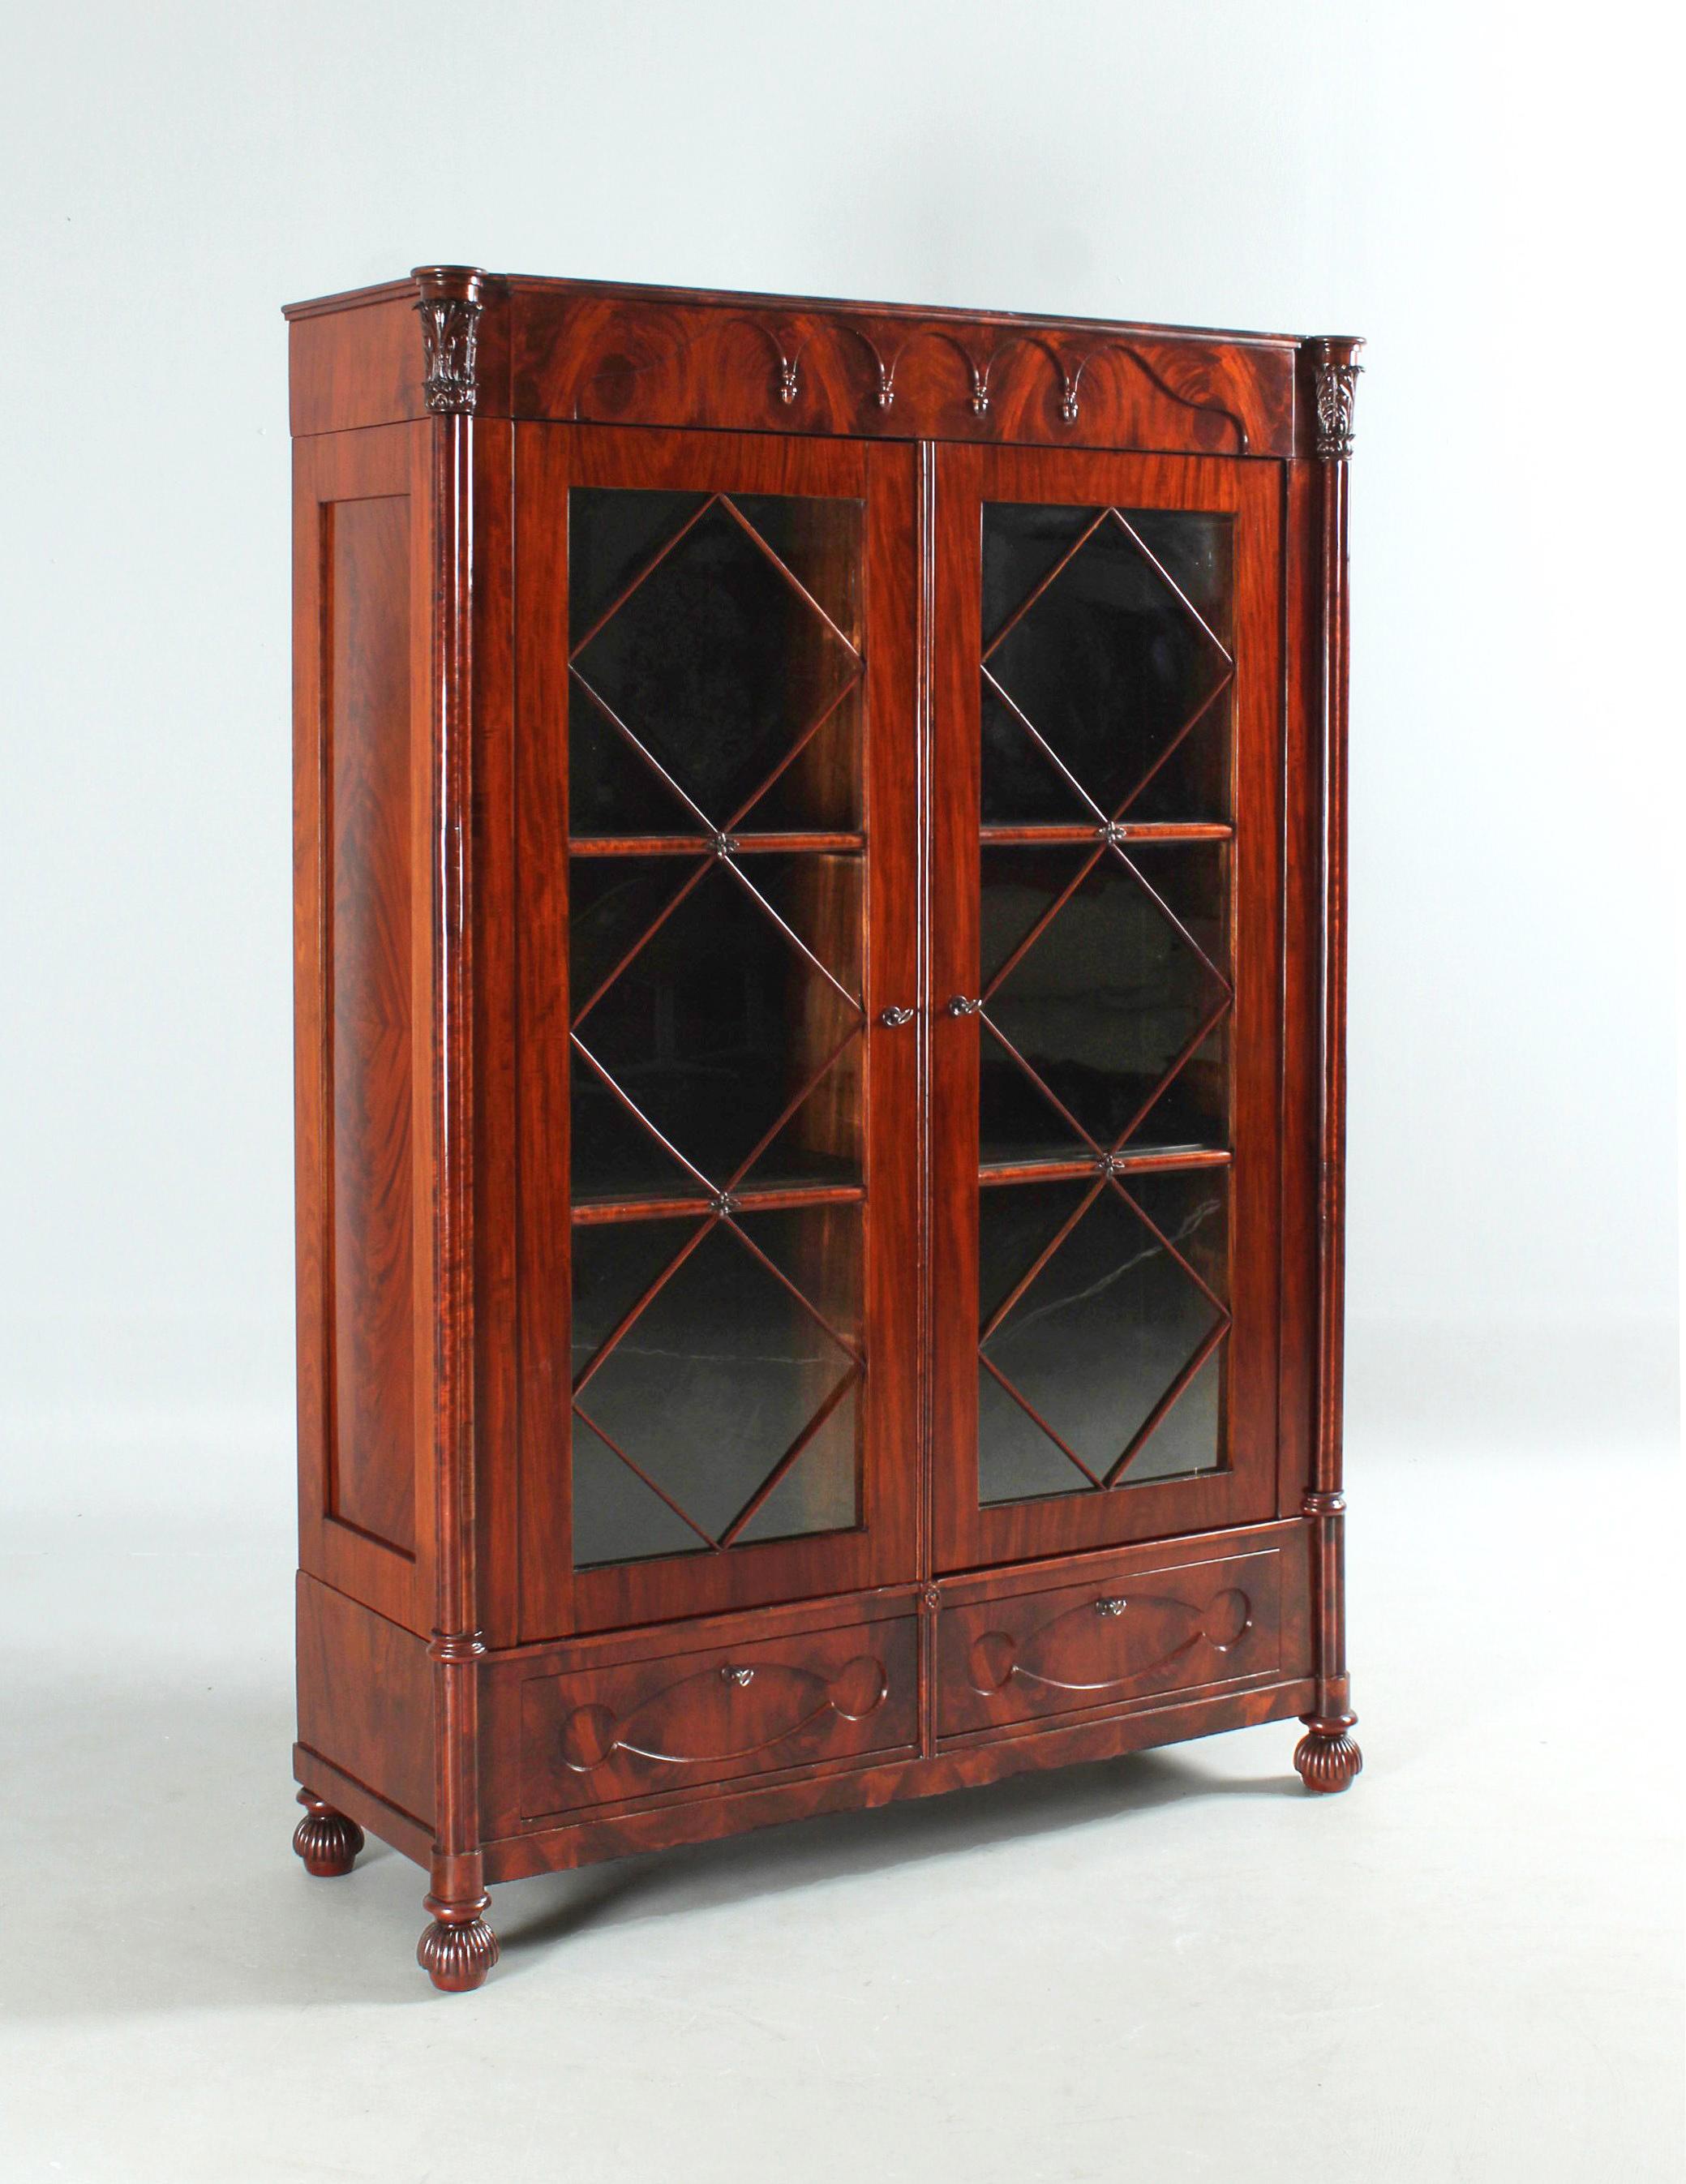 Antique bookcase

North Germany
Mahogany
middle 19th century

Dimensions: H x W x D: 198 x 138 x 49 cm

Description:
Front glazed bookcase from the late Biedermeier era circa 1850-1860.

Body standing on carved round feet.
At the front we see two